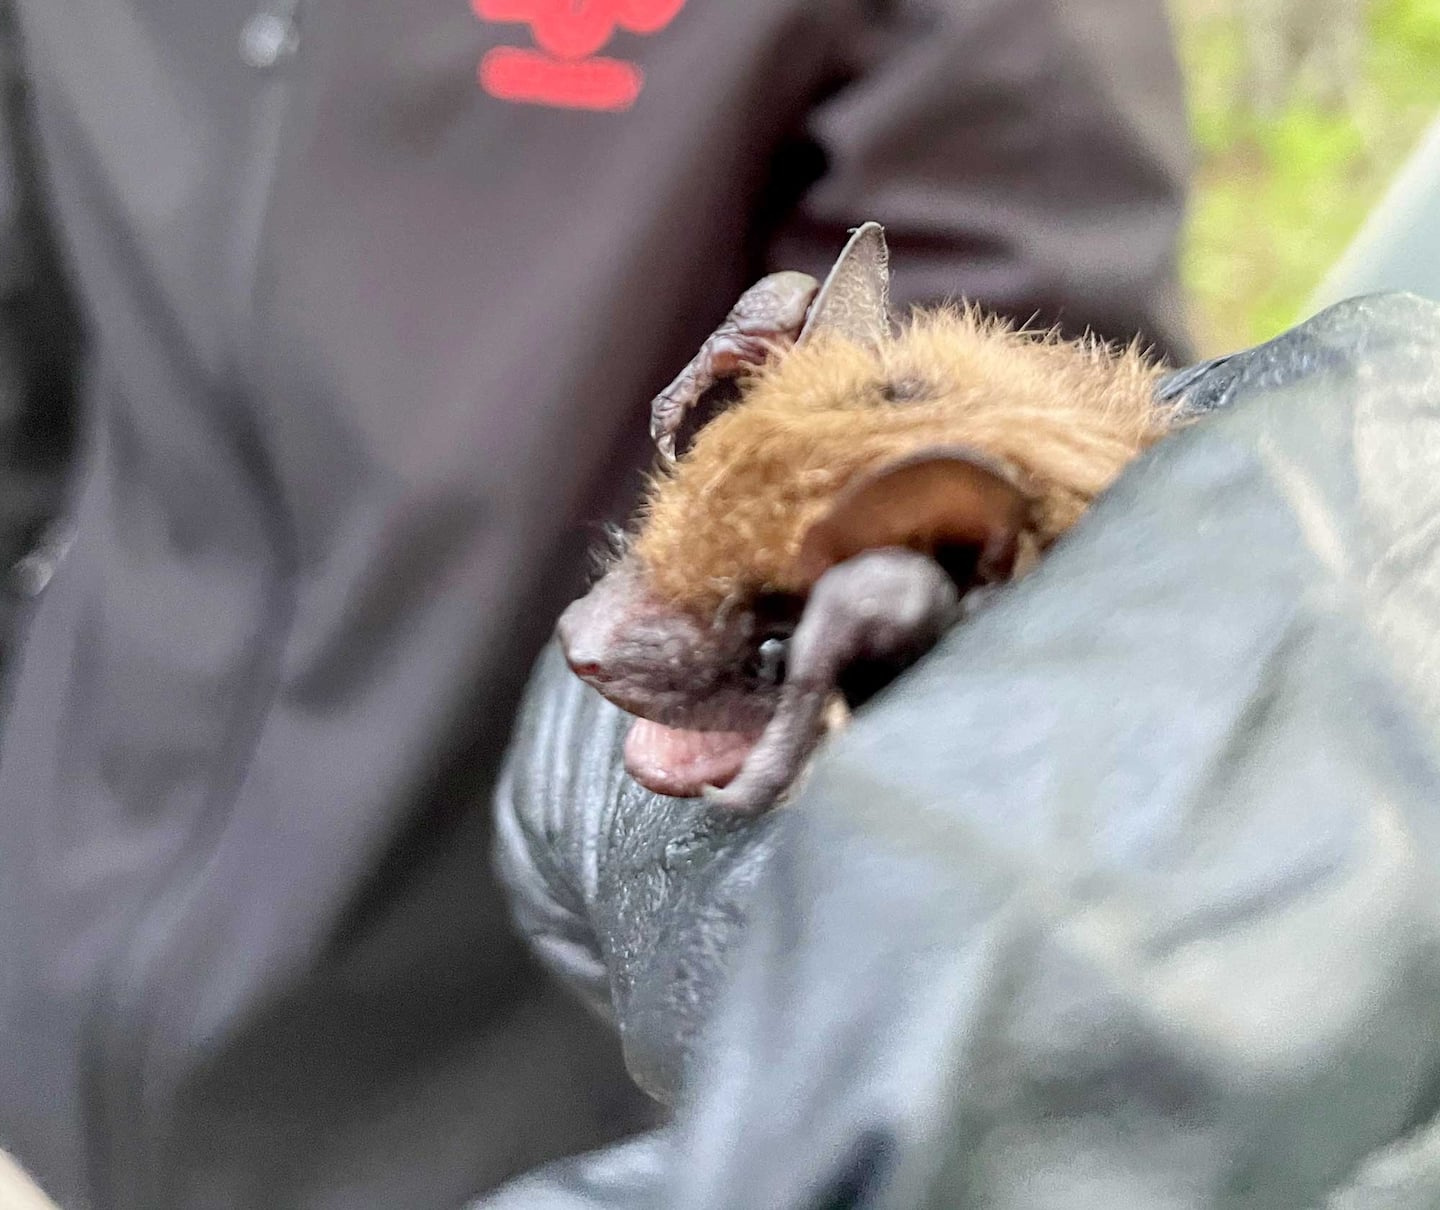 Nearly 100 bats rescued then released